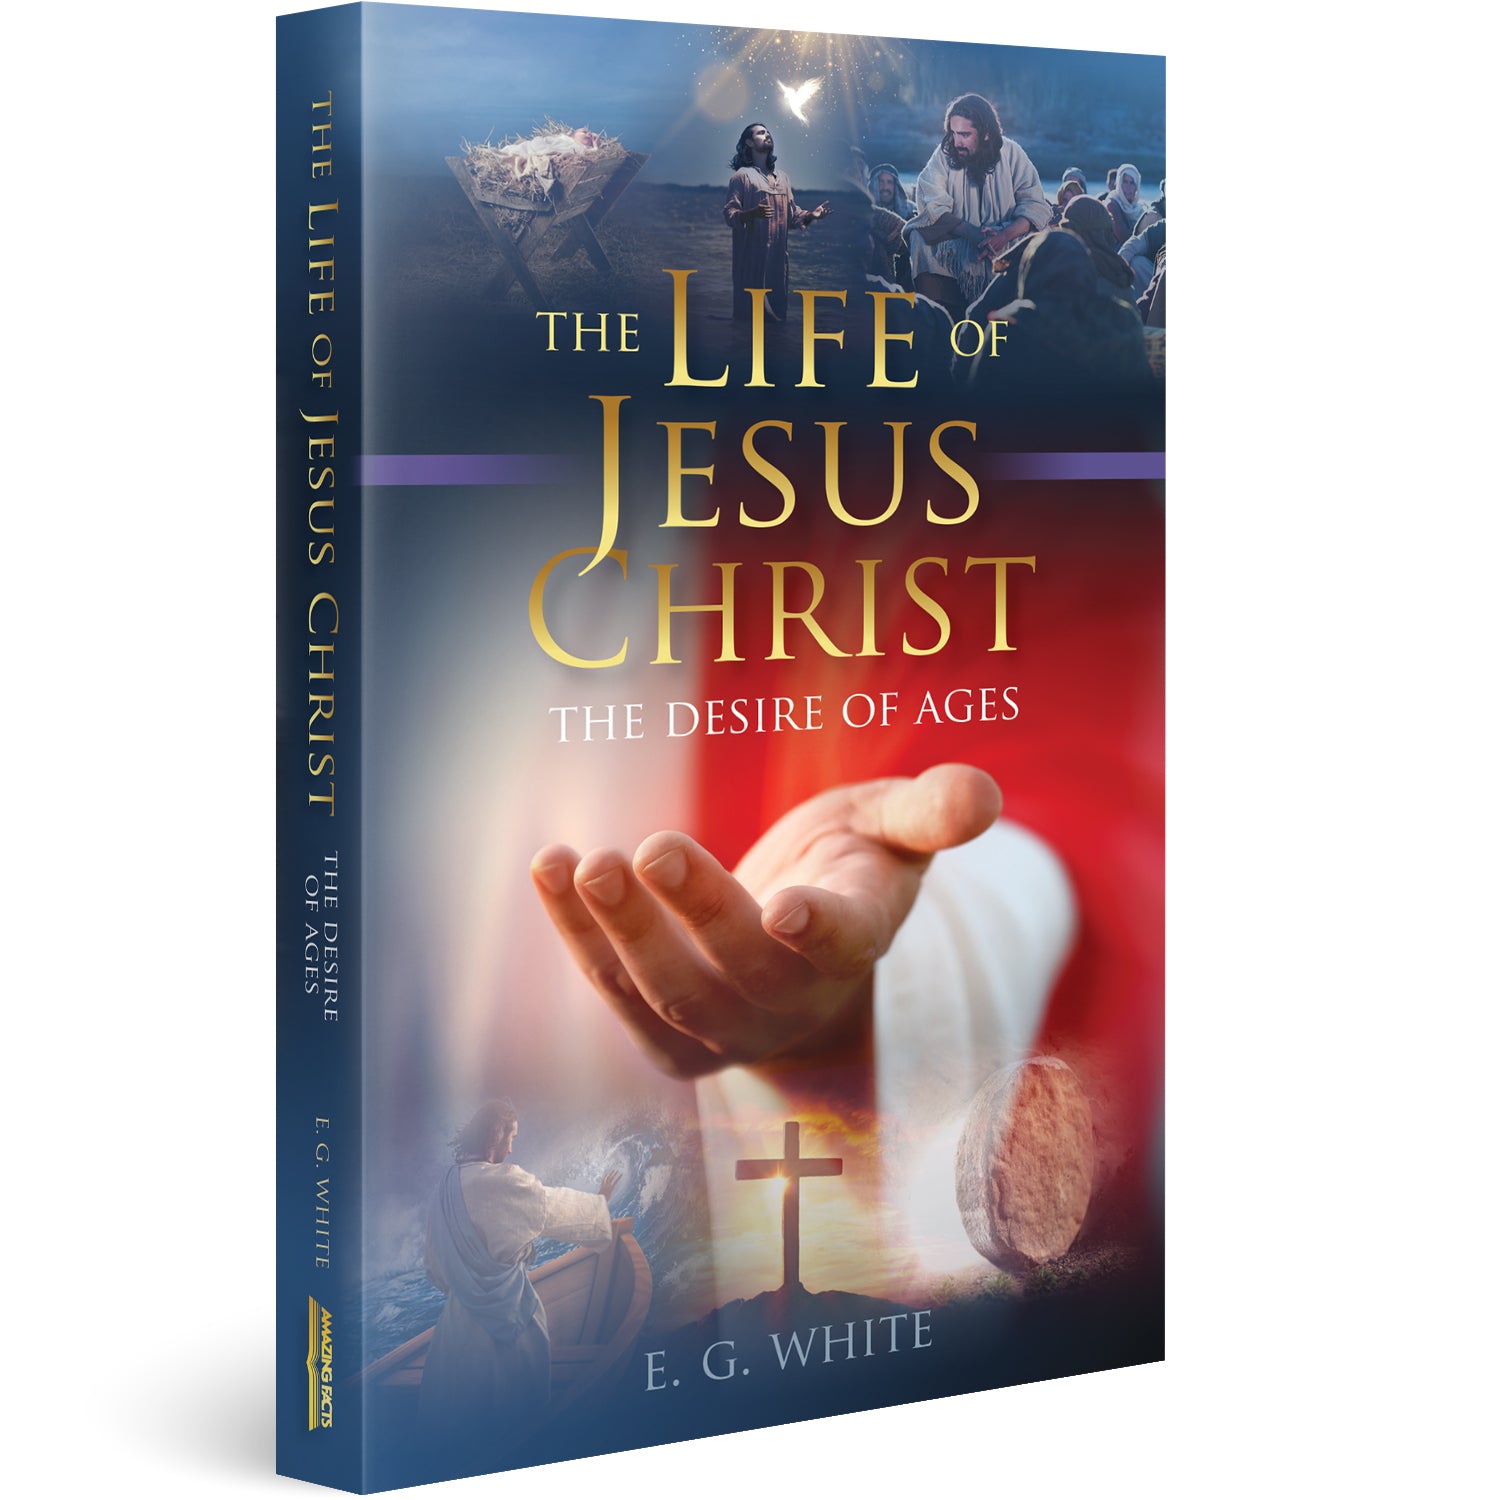 The Life of Jesus Christ: The Desire of Ages